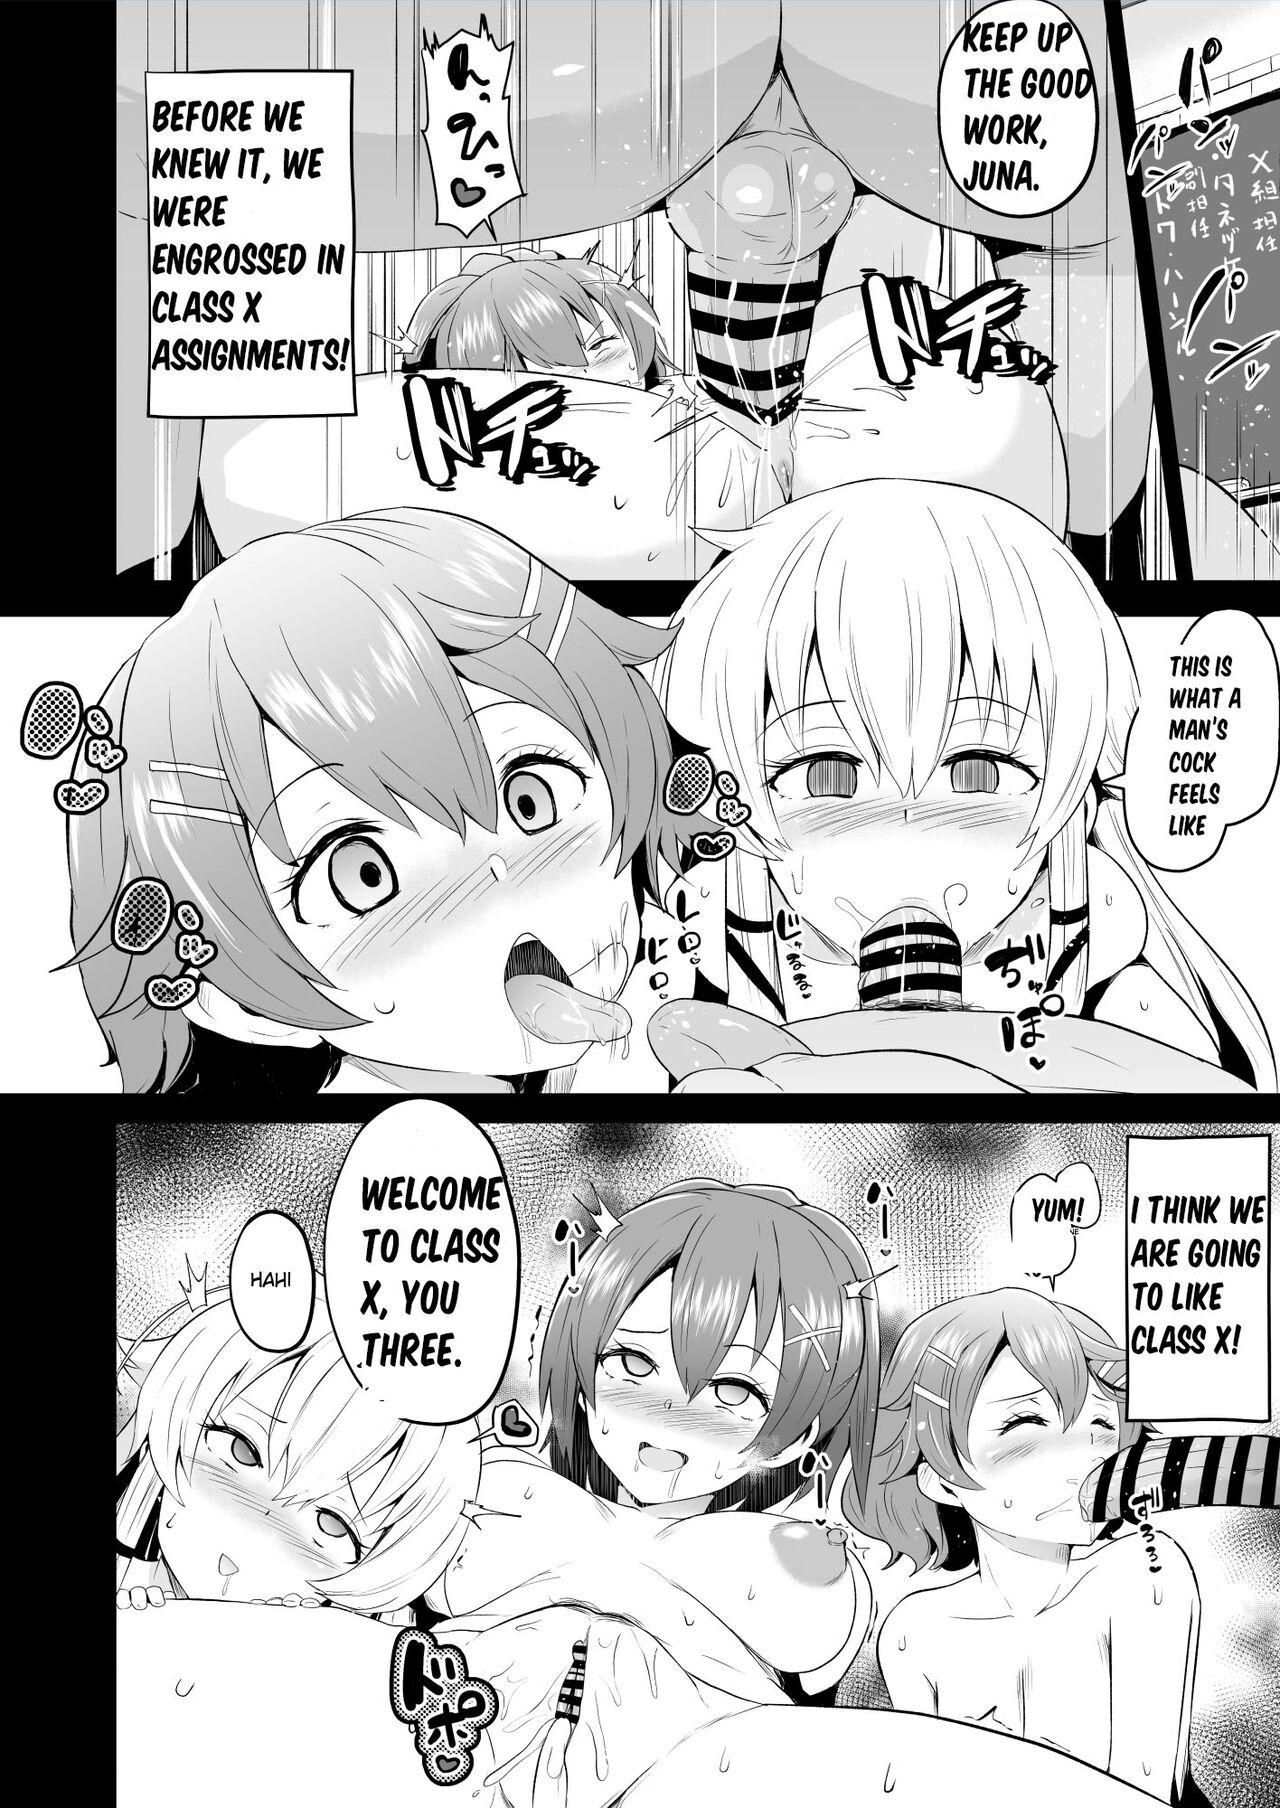 Gaygroup Hypnosis of the New Class VII - Juna's Report - The legend of heroes | eiyuu densetsu Funny - Page 6